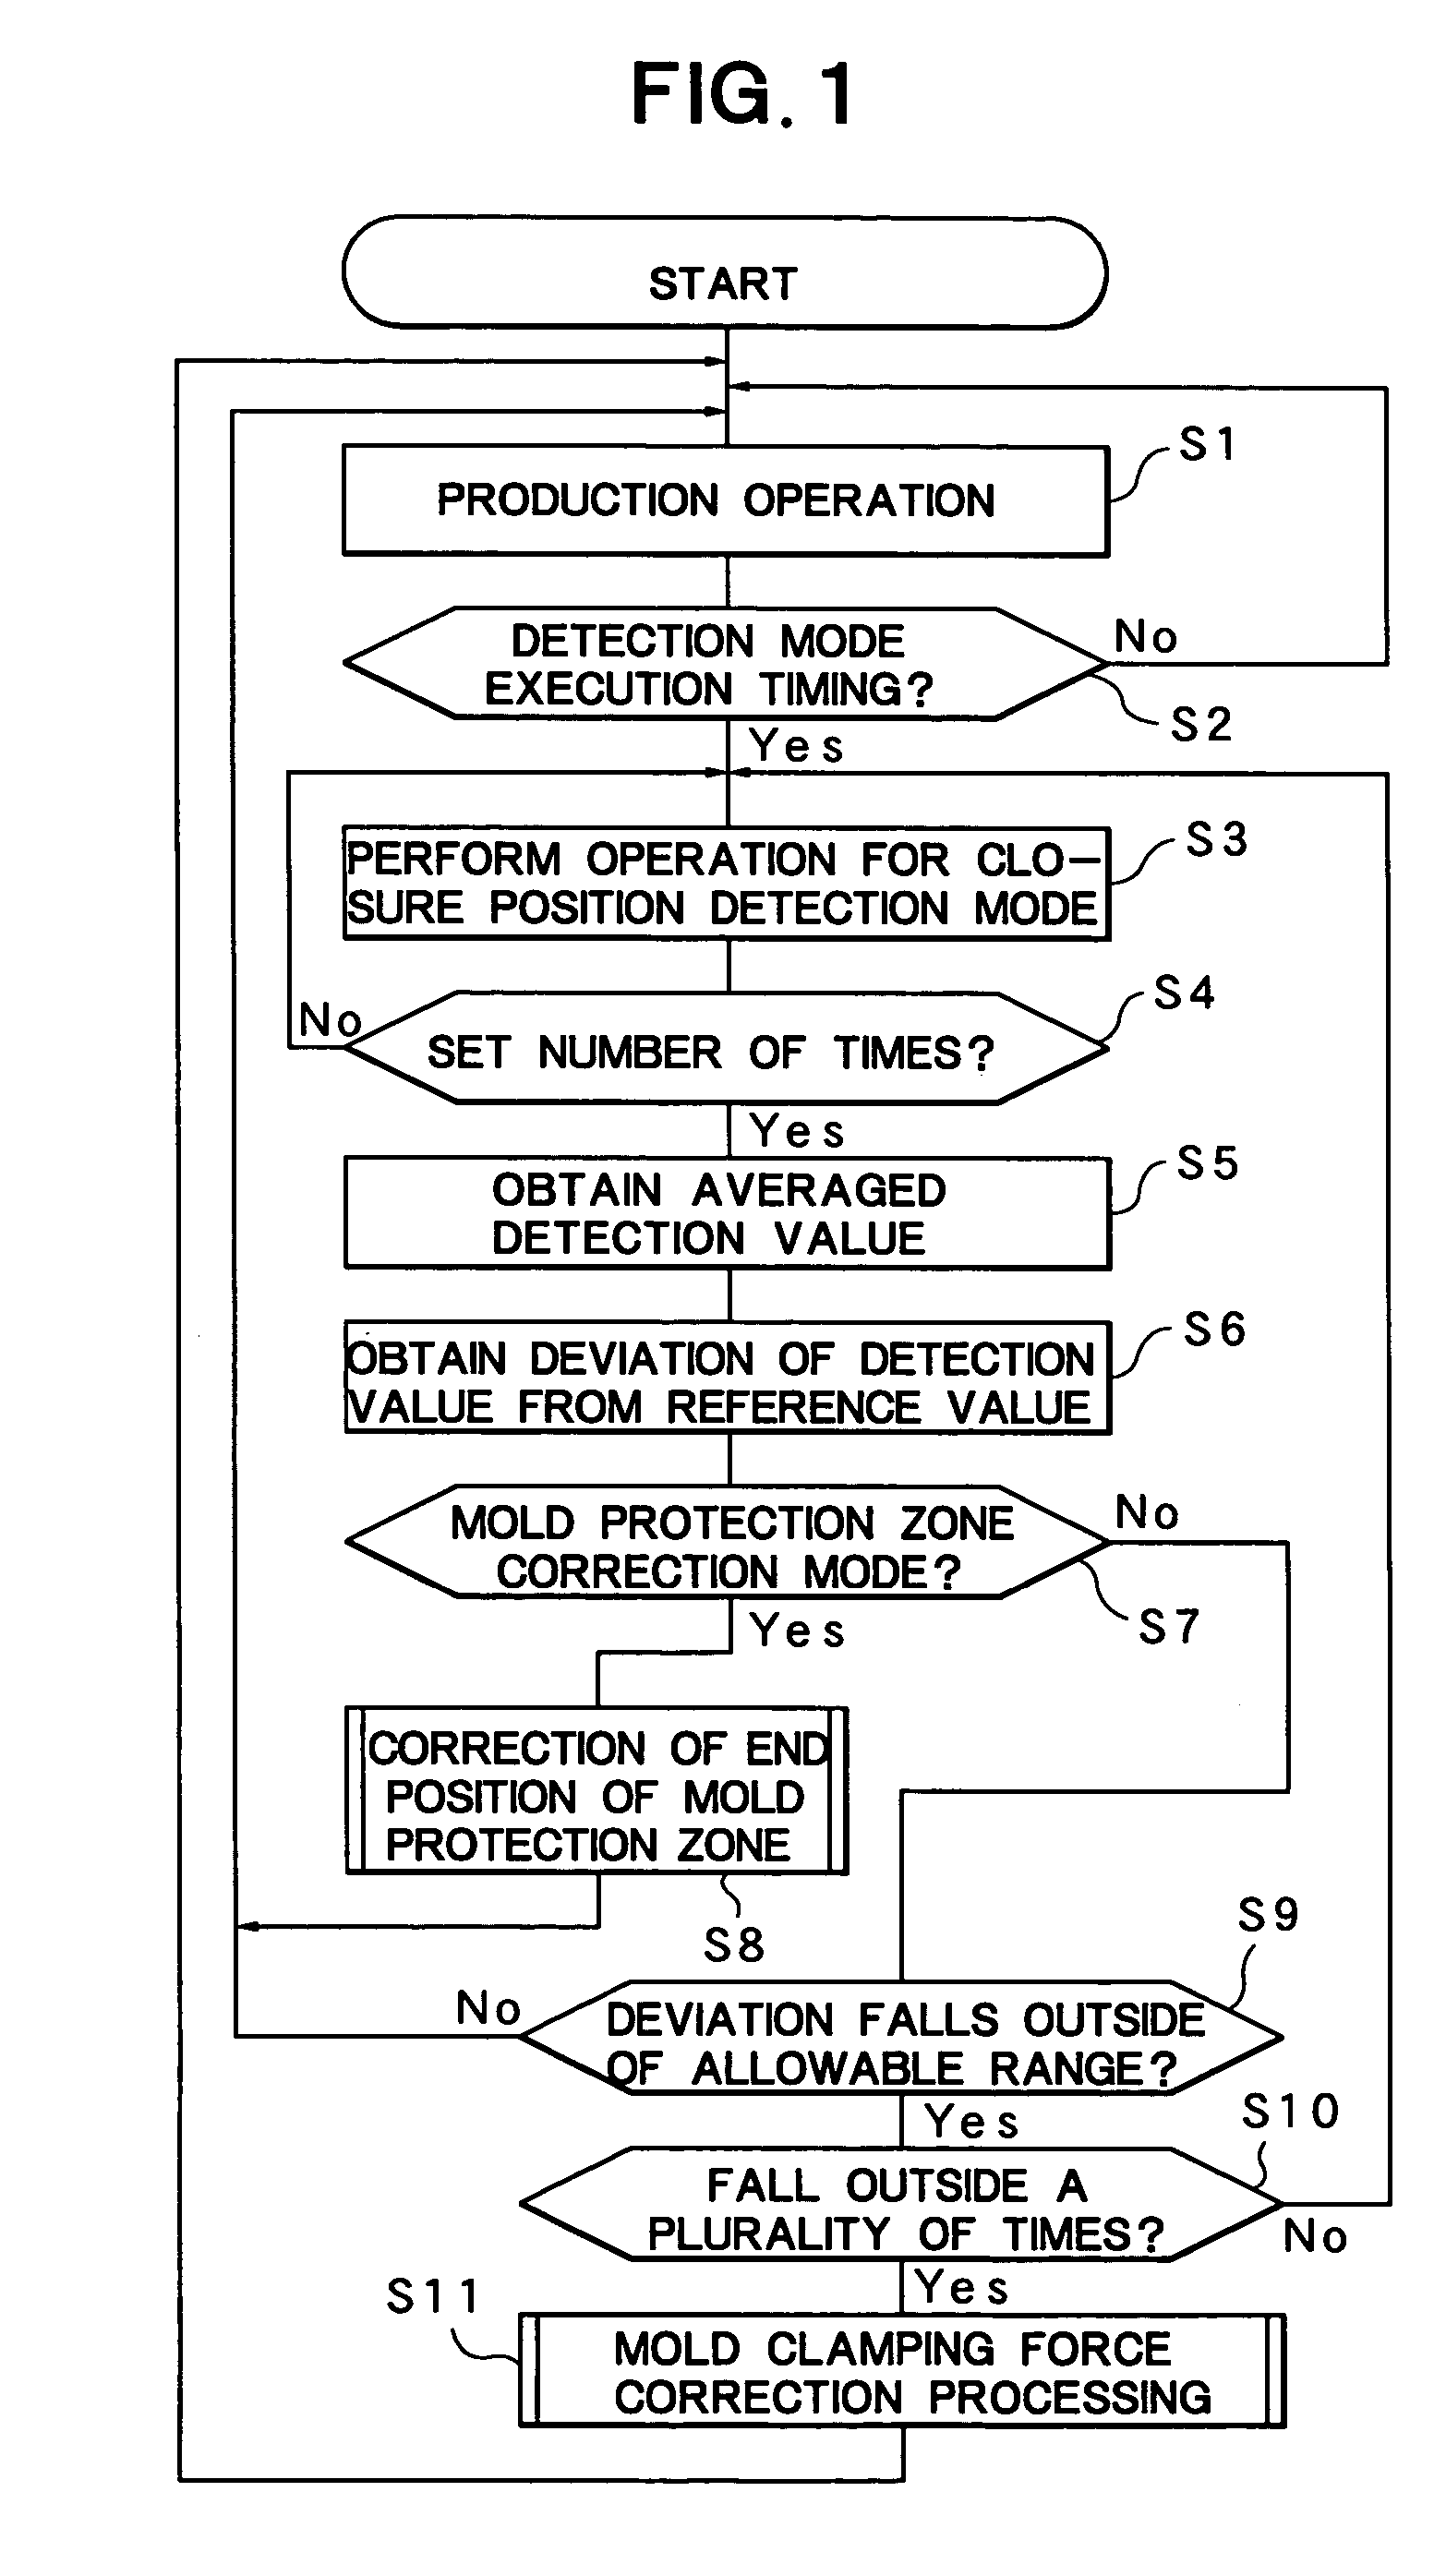 Mold protection method for mold clamping apparatus